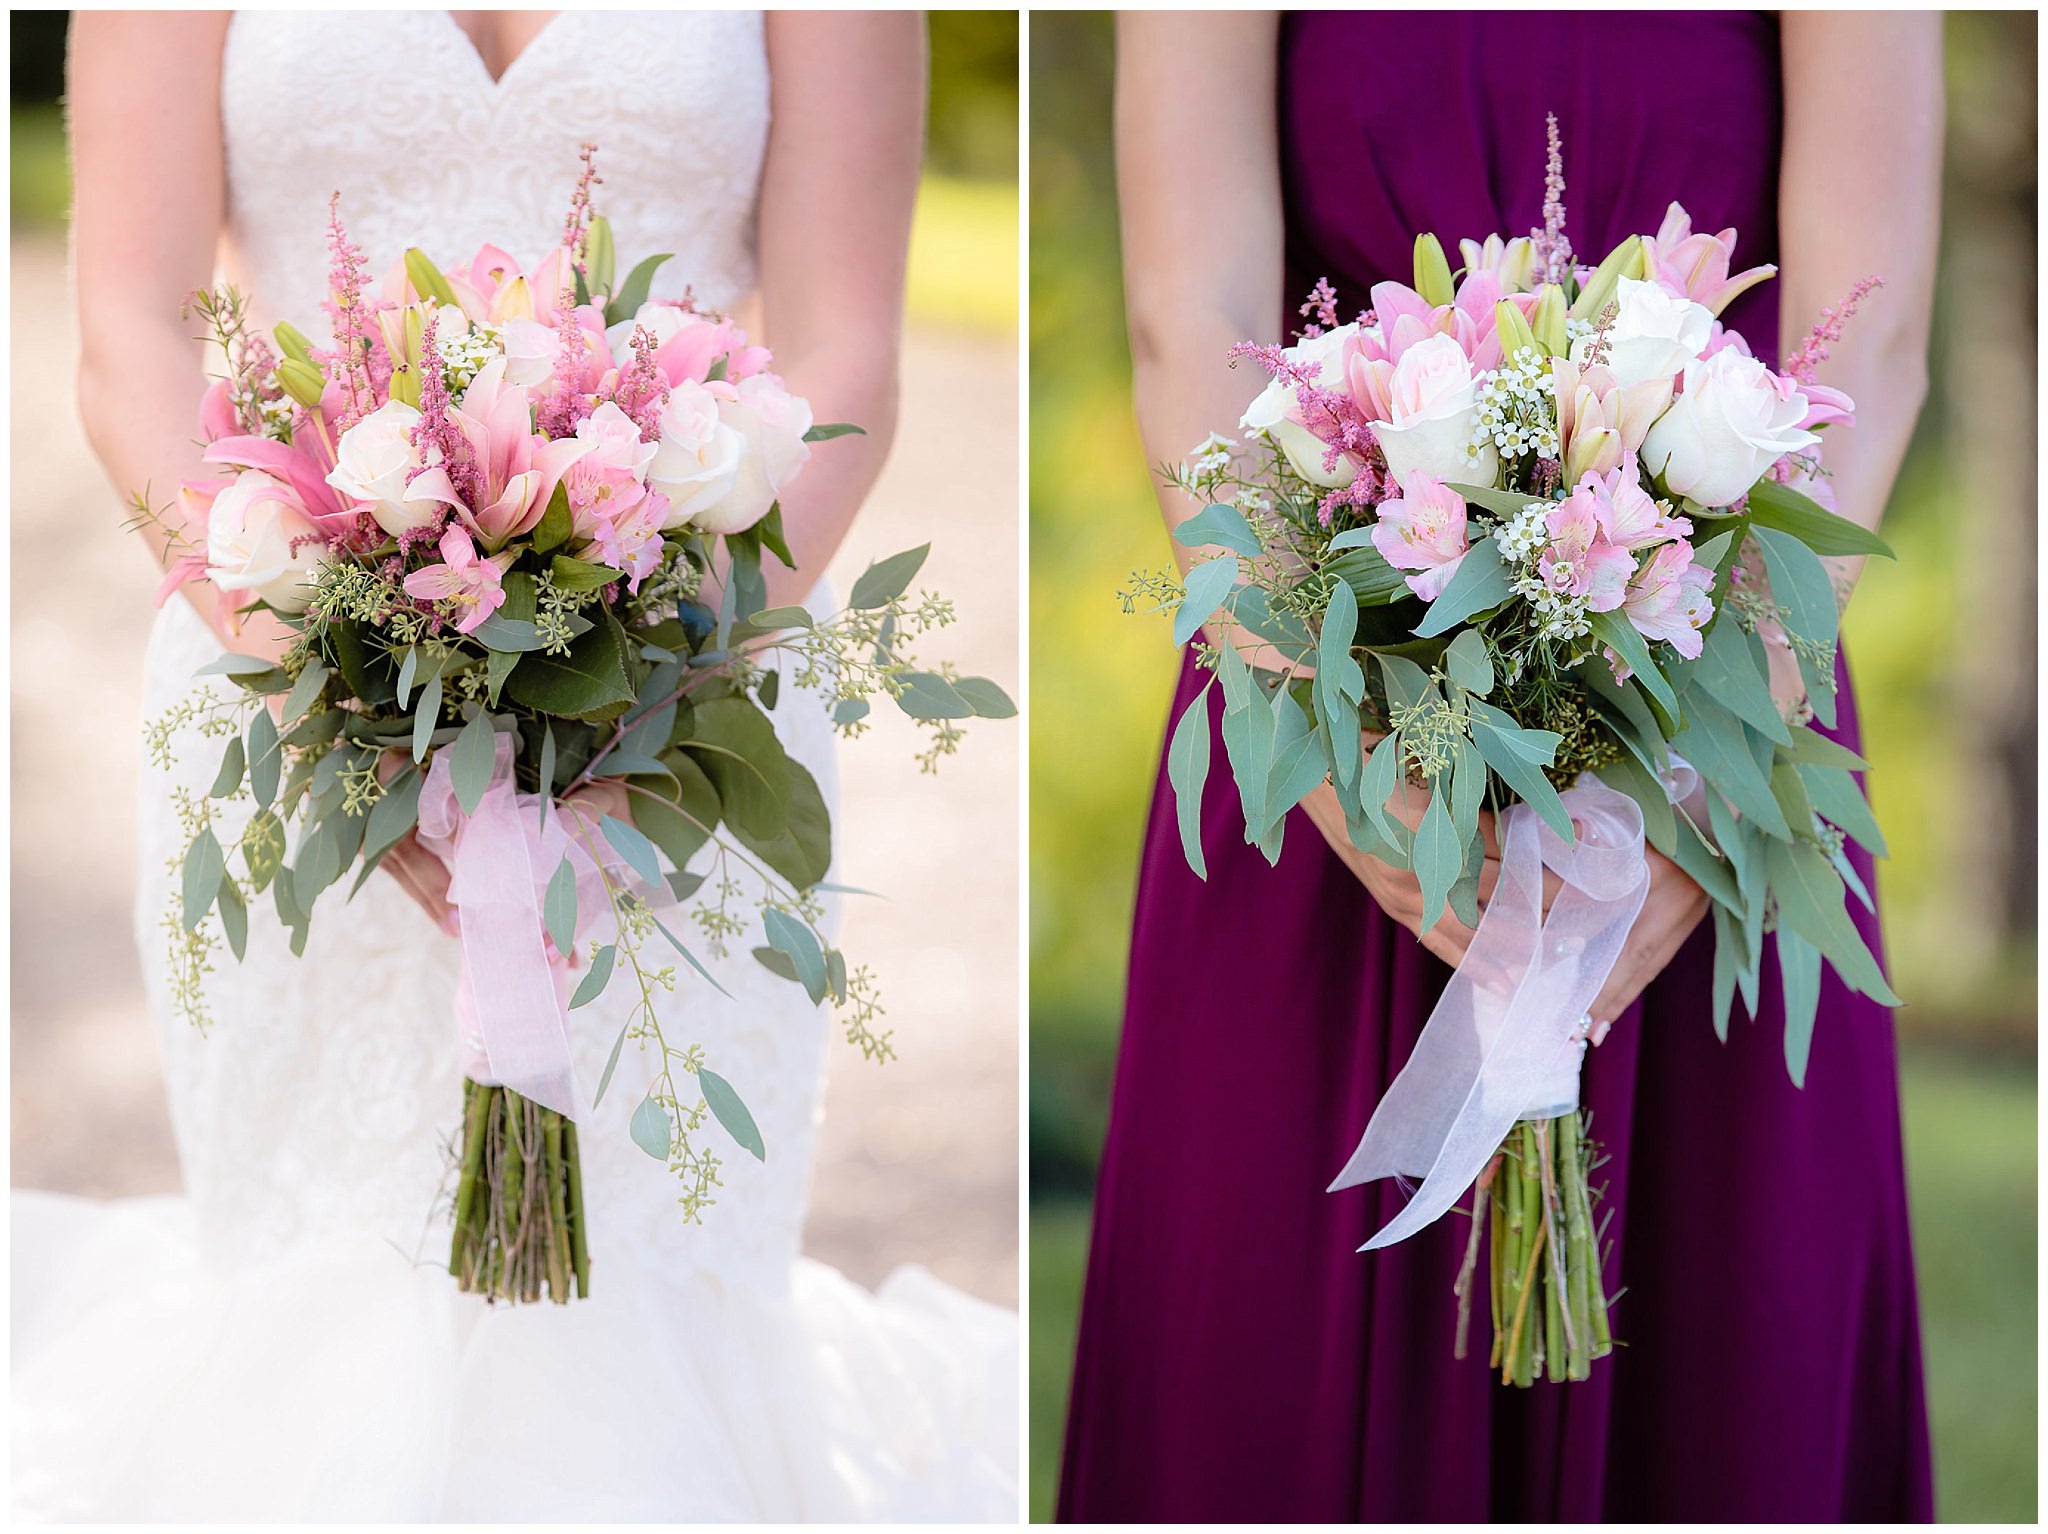 Wedding bouquets by Weischedel Florist for a Greystone Fields wedding in September